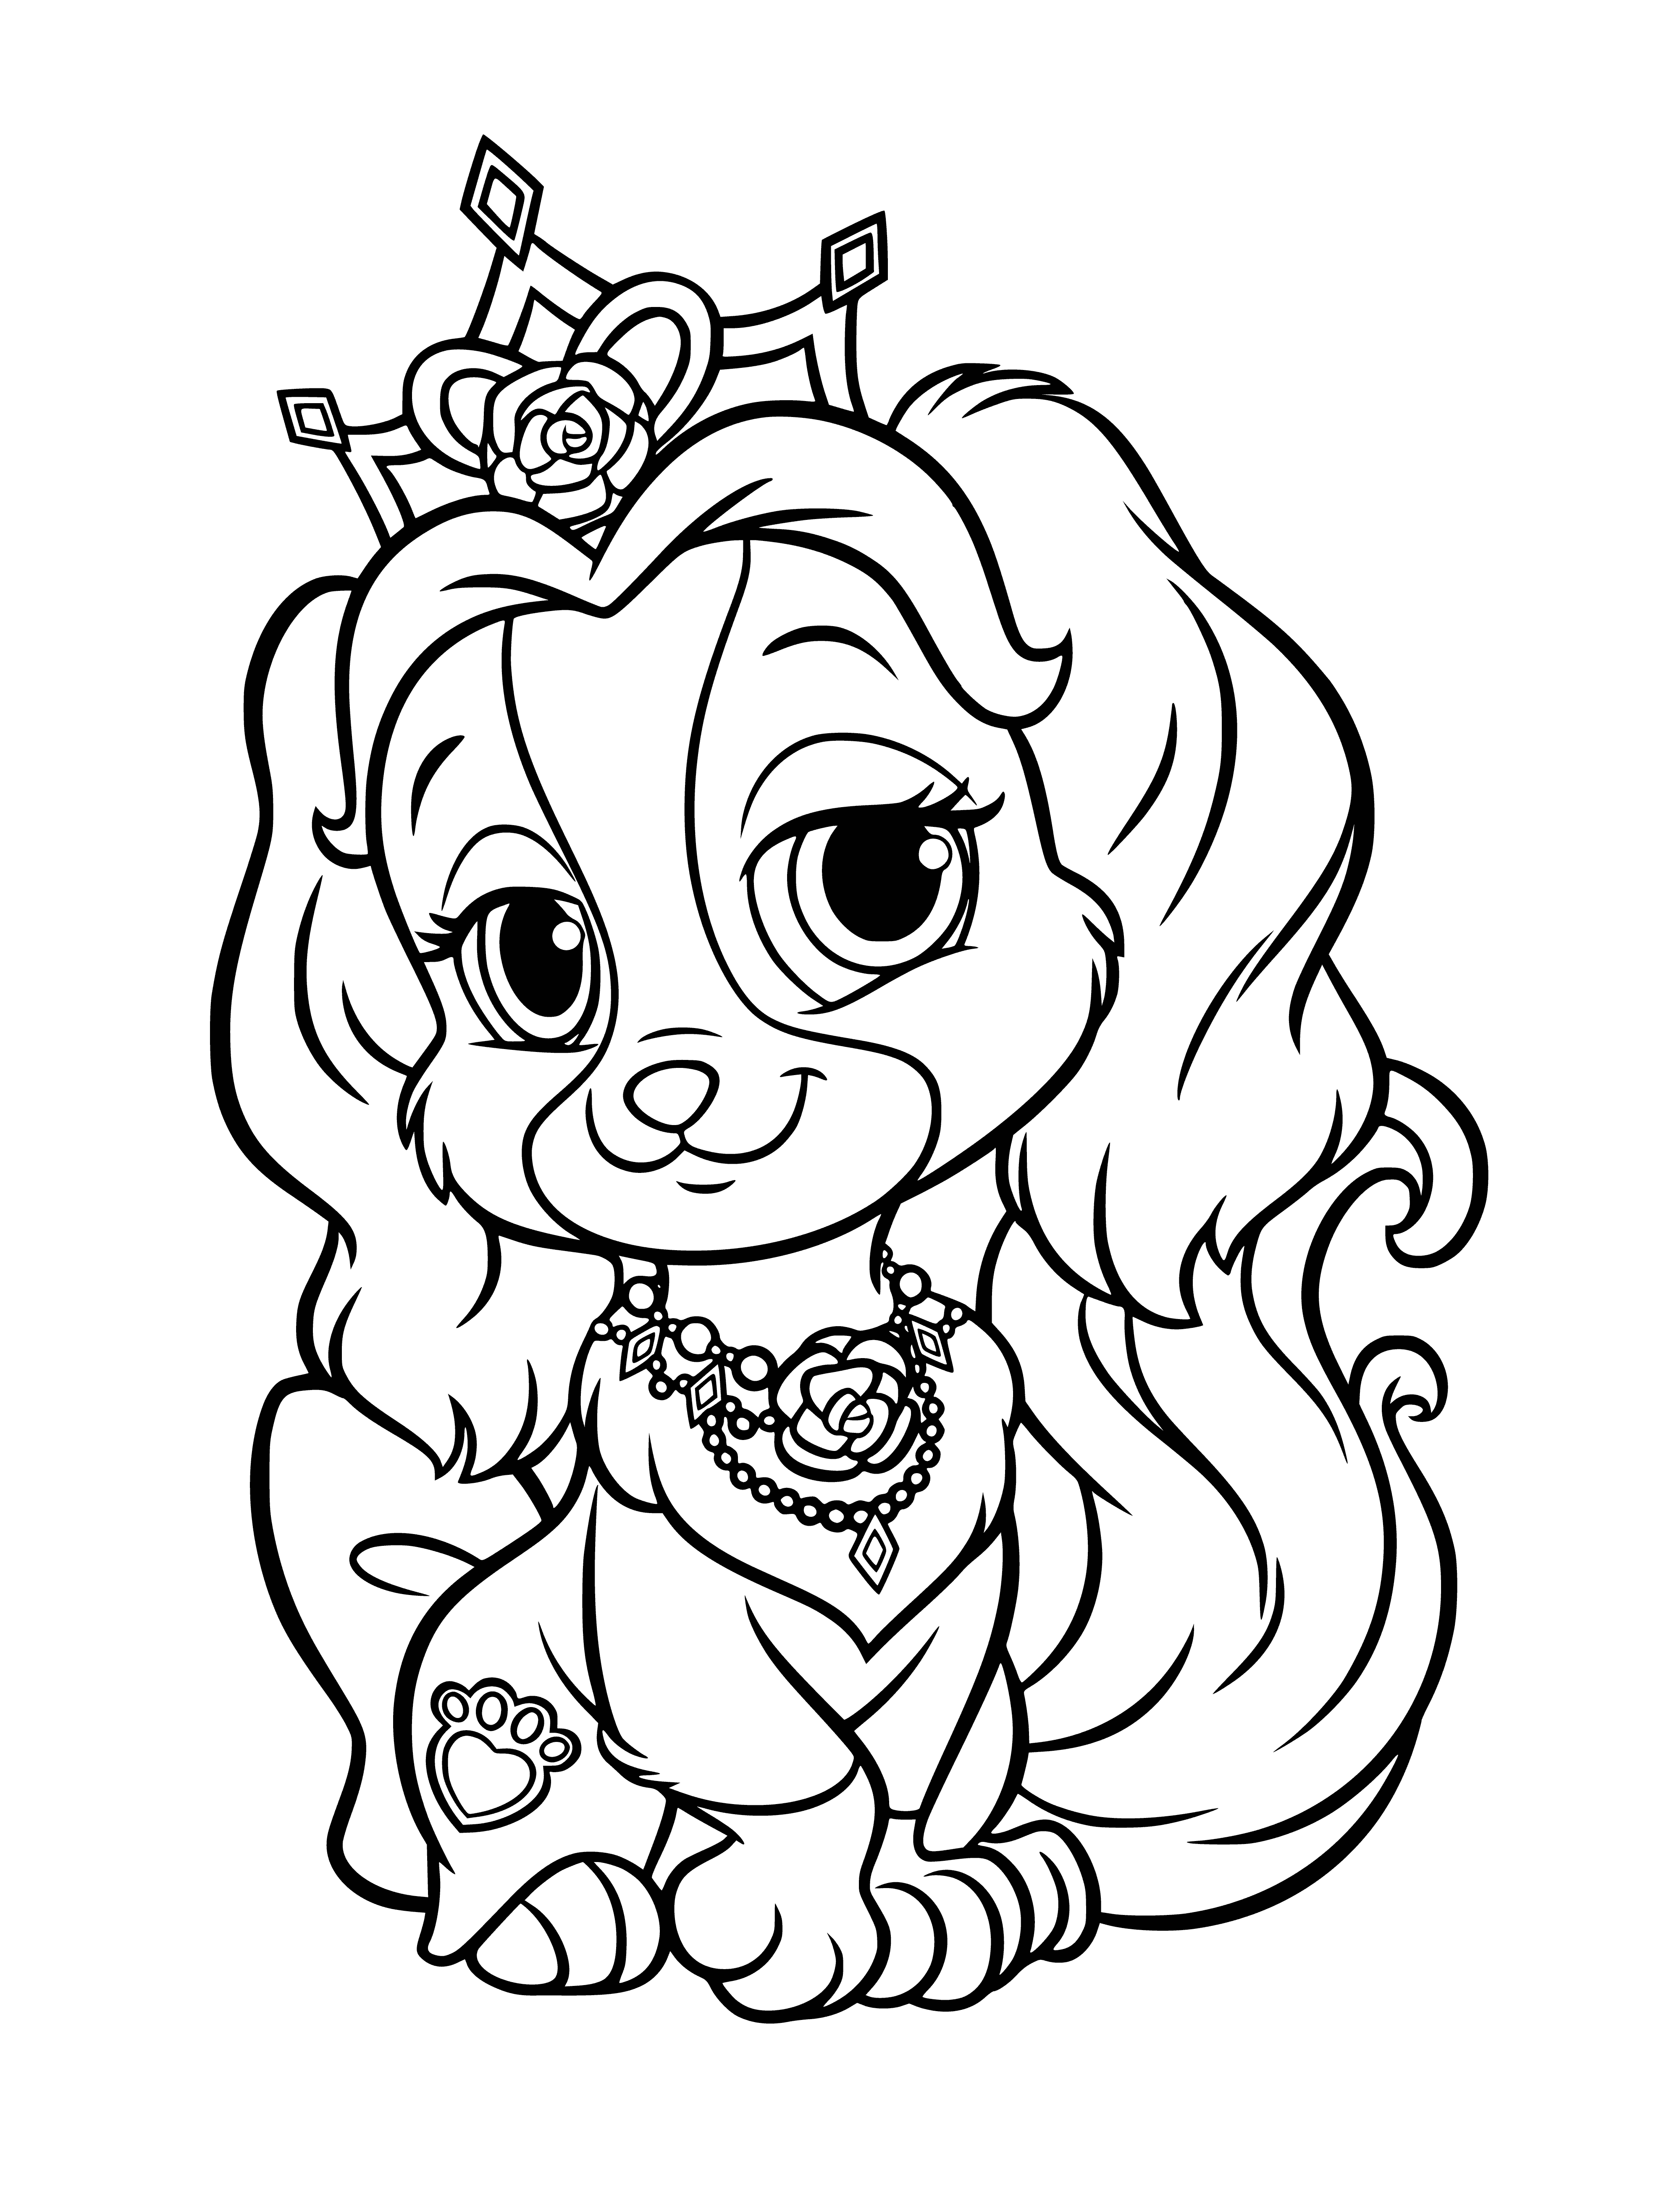 Puppy Baby. Pet Belle coloring page